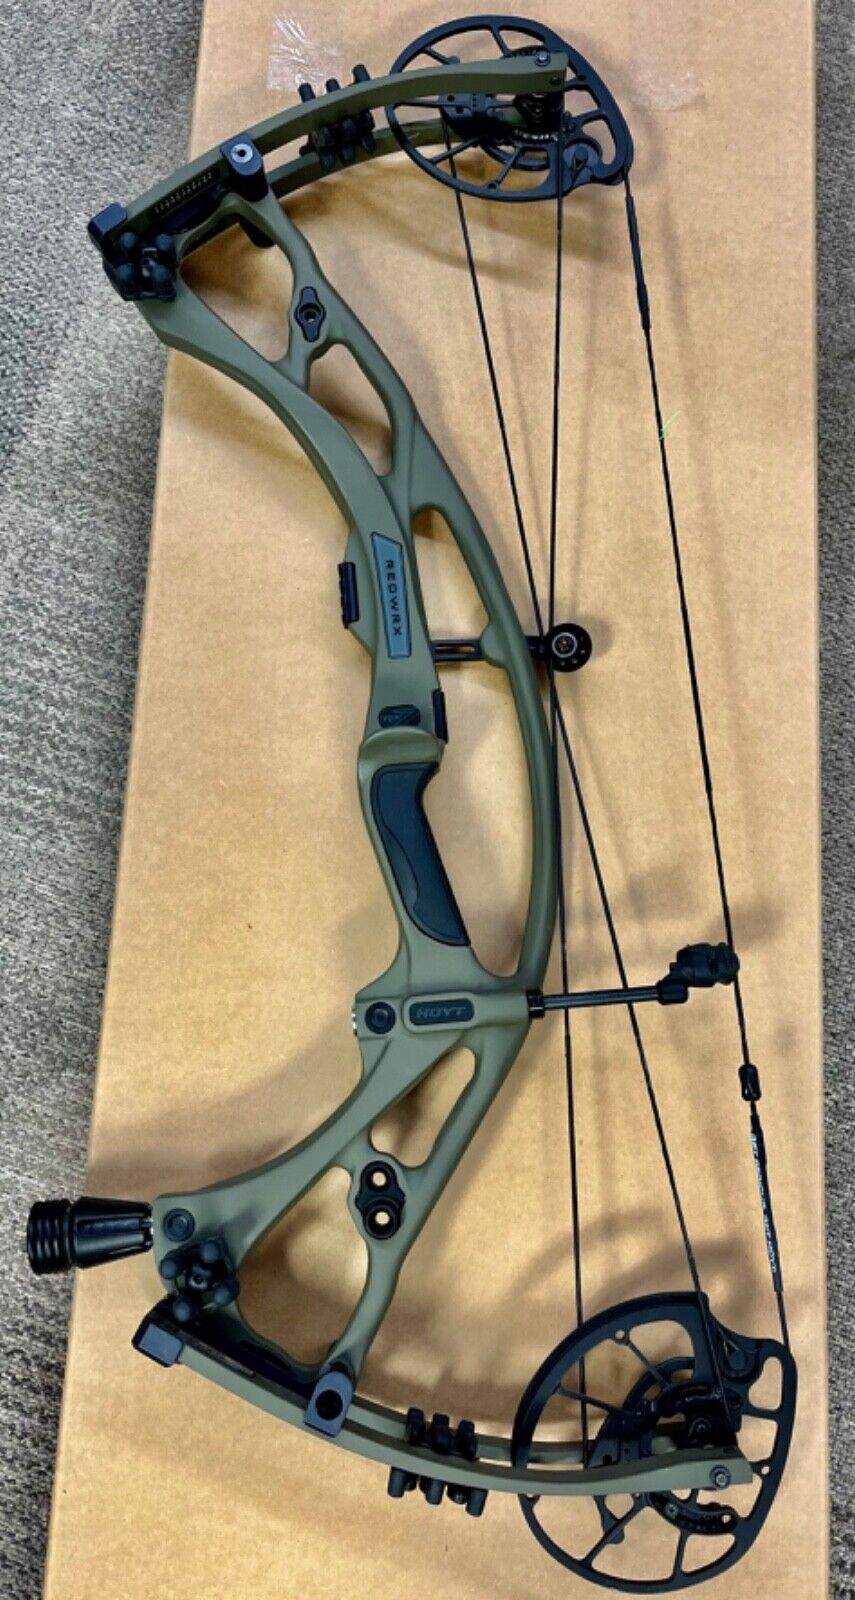 NEW !! HOYT RX-7 Wilderness Green, 60-70lb, 25-30" Compound Archery Hunting Bow